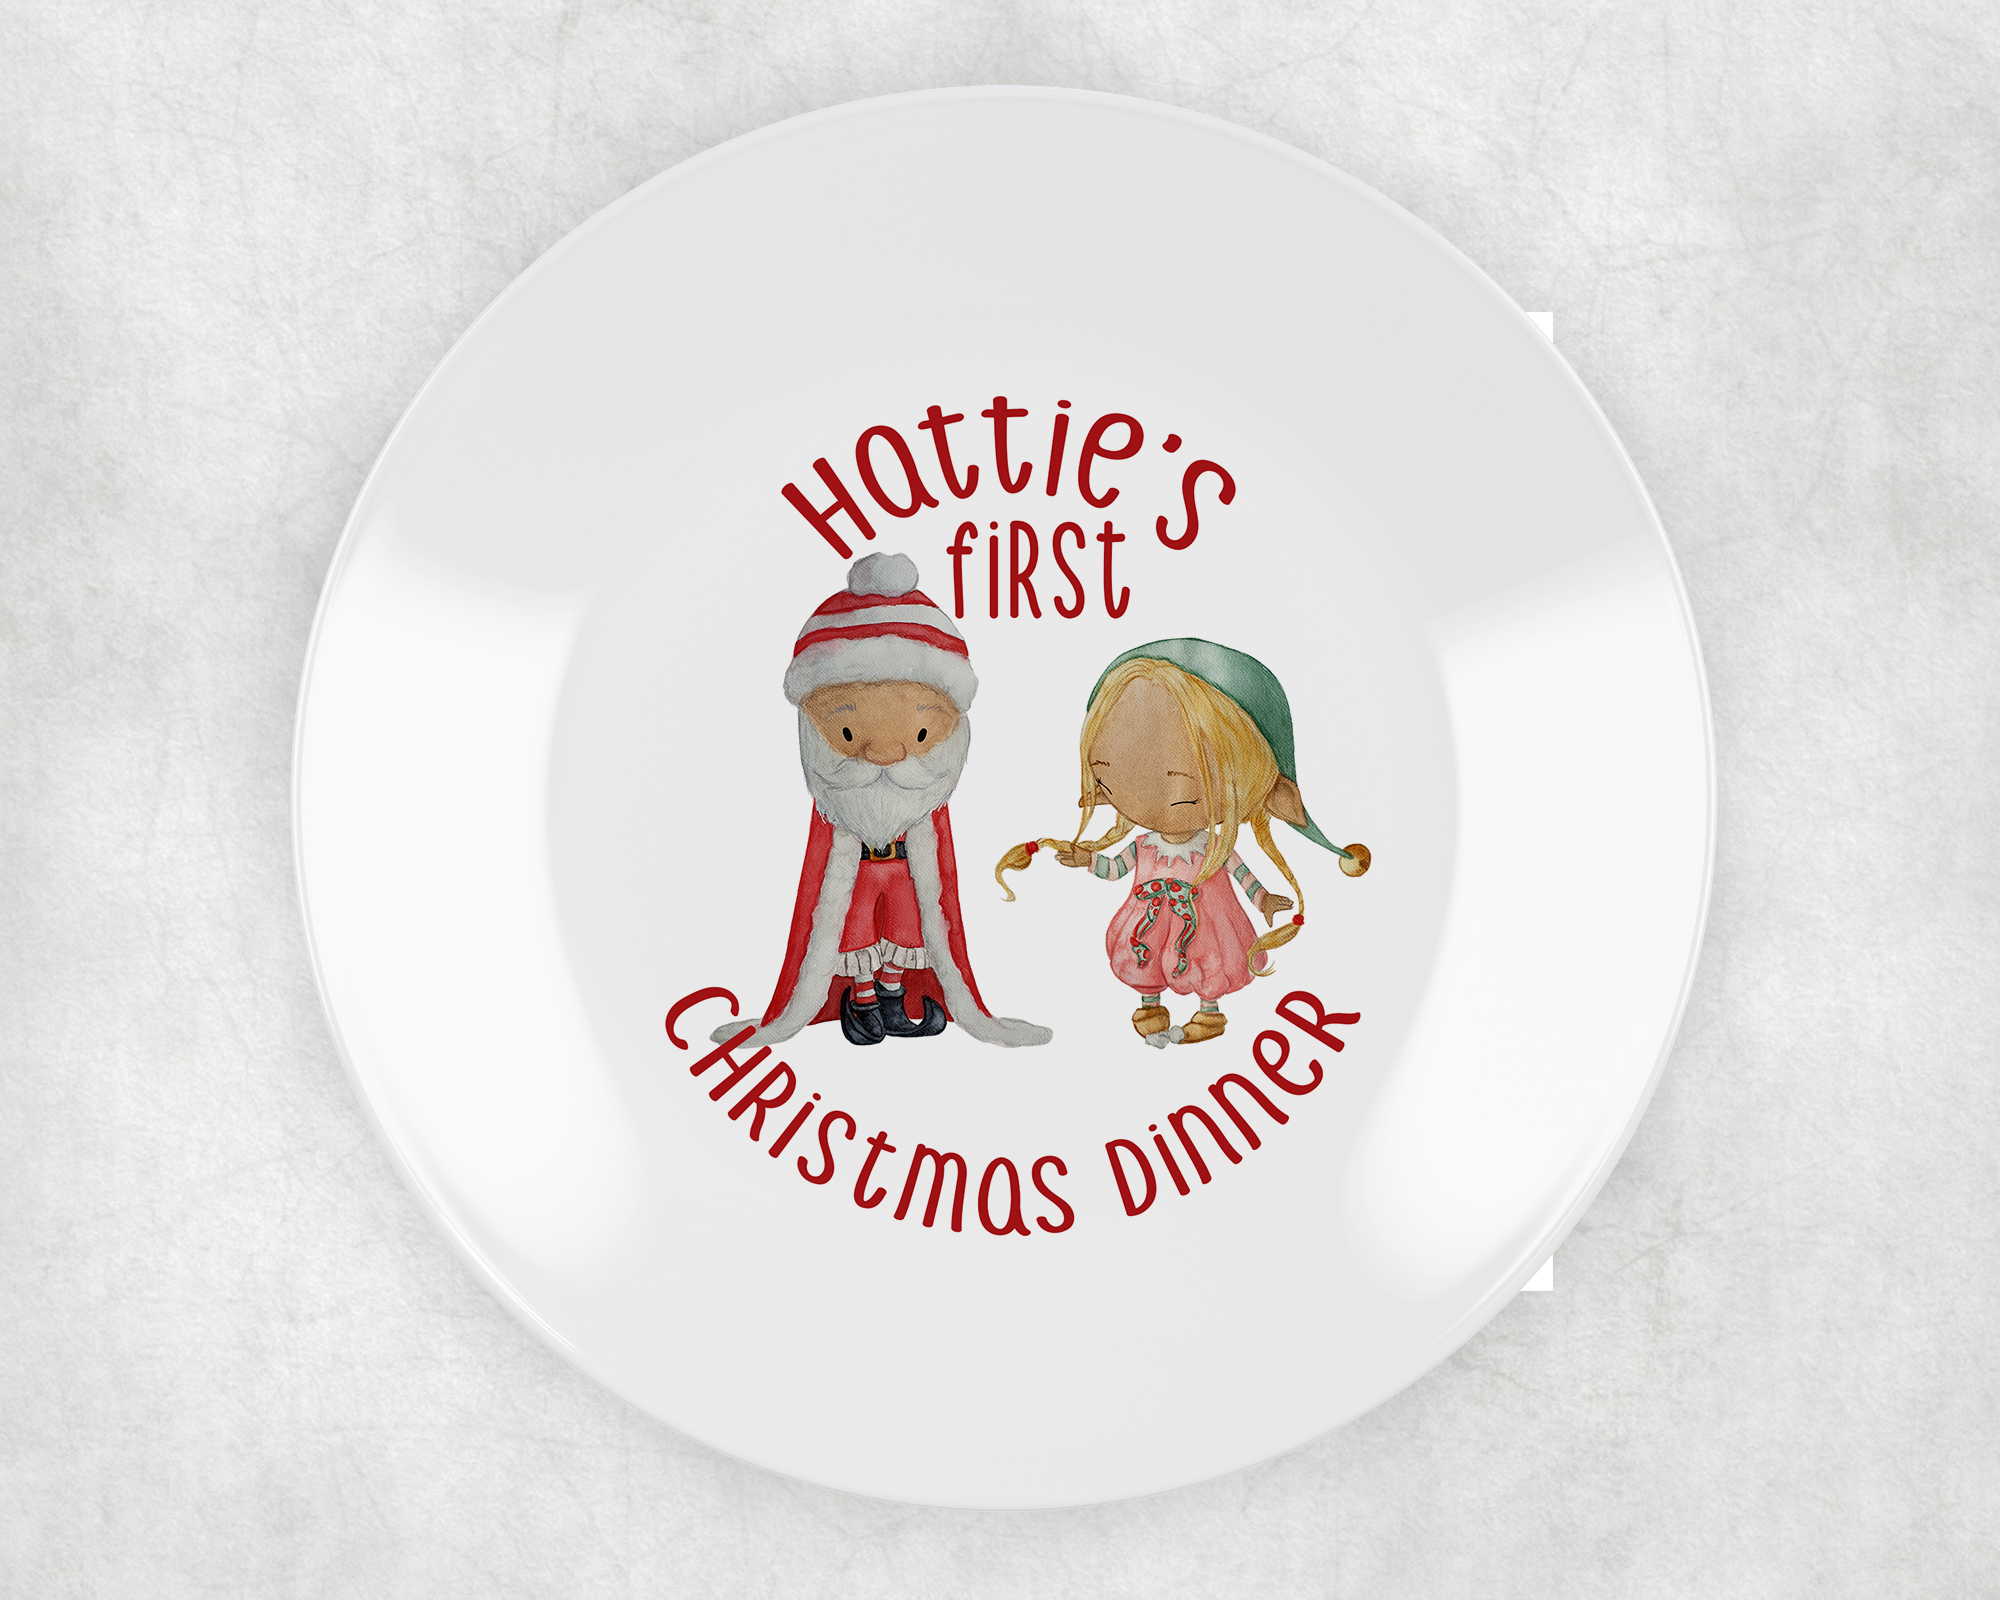 my first christmas plate personalised with santa and elf. ideal plastic non breakable plate. santa, girl elf with blond hair, no background